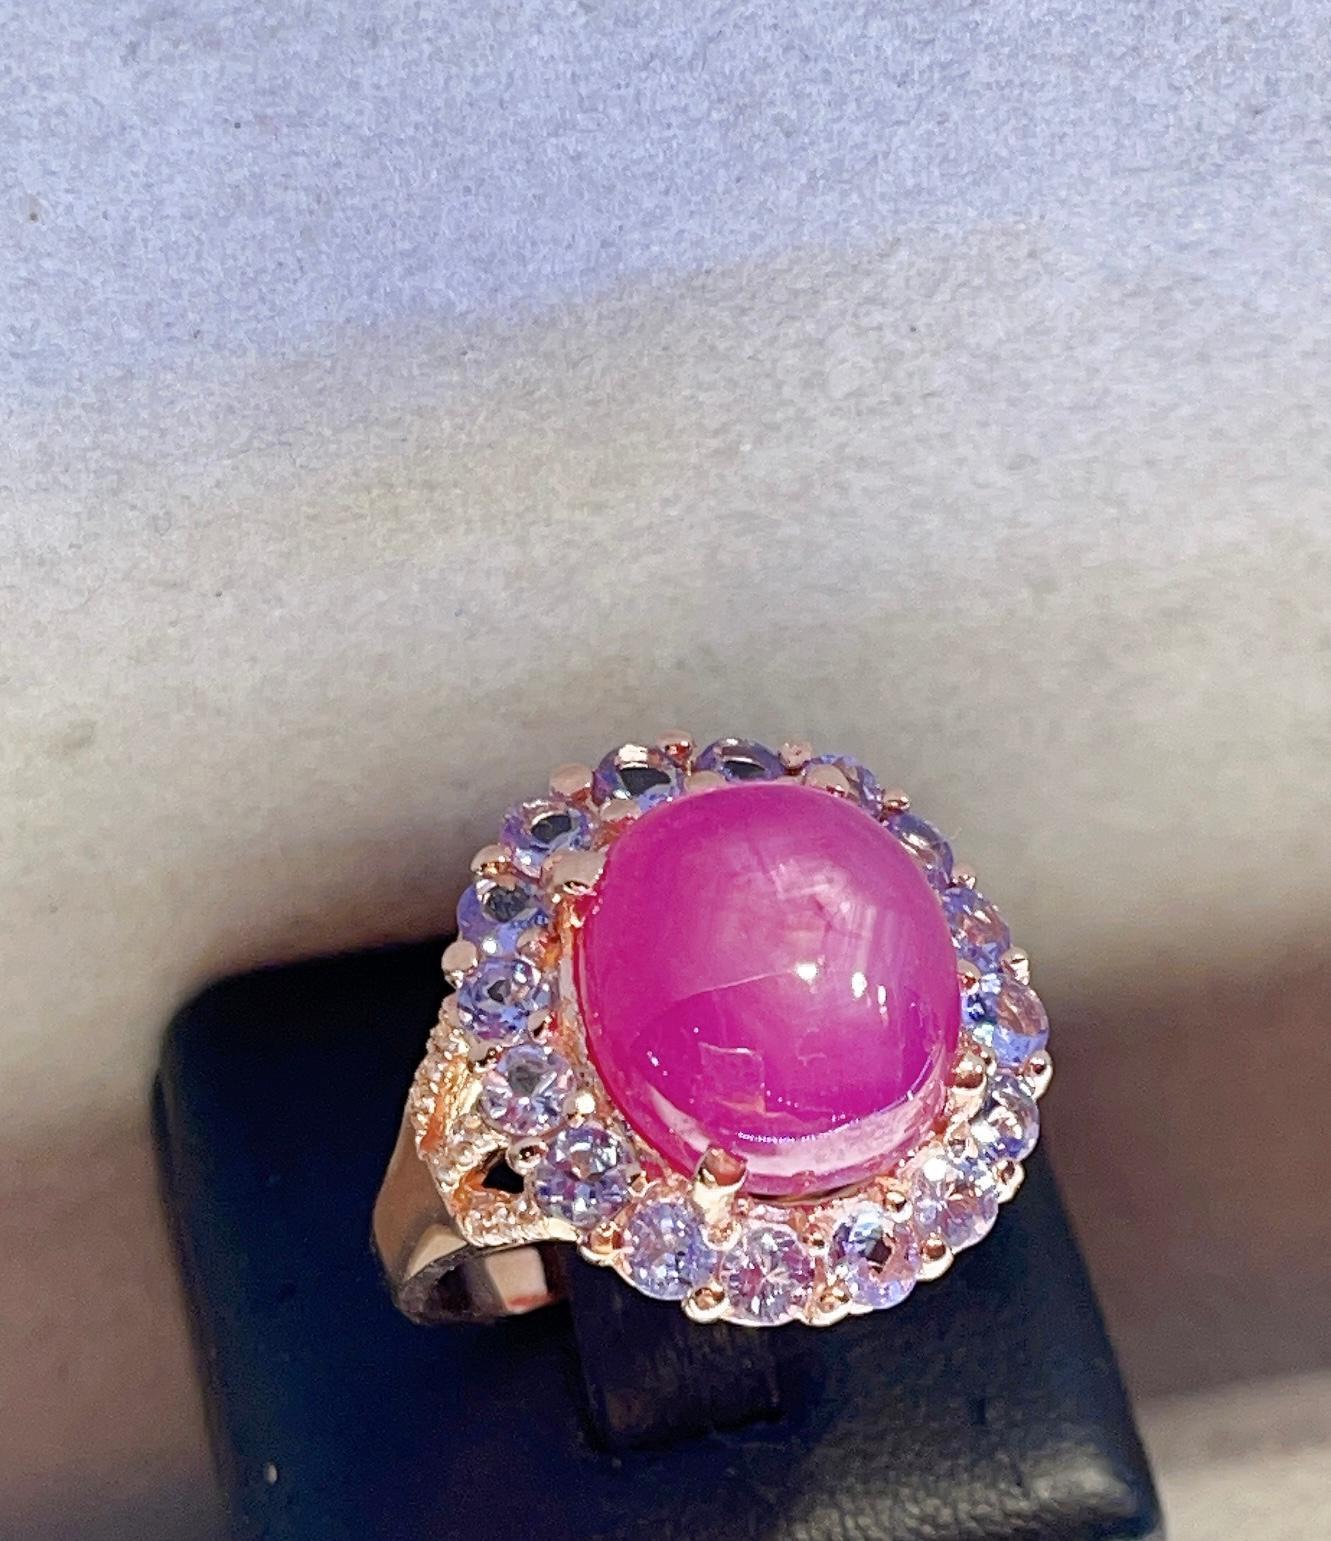 Belle Époque Bochic “Capri” Star Ruby Cocktail Ring with Purple Tanzanite set in 22K Gold … For Sale